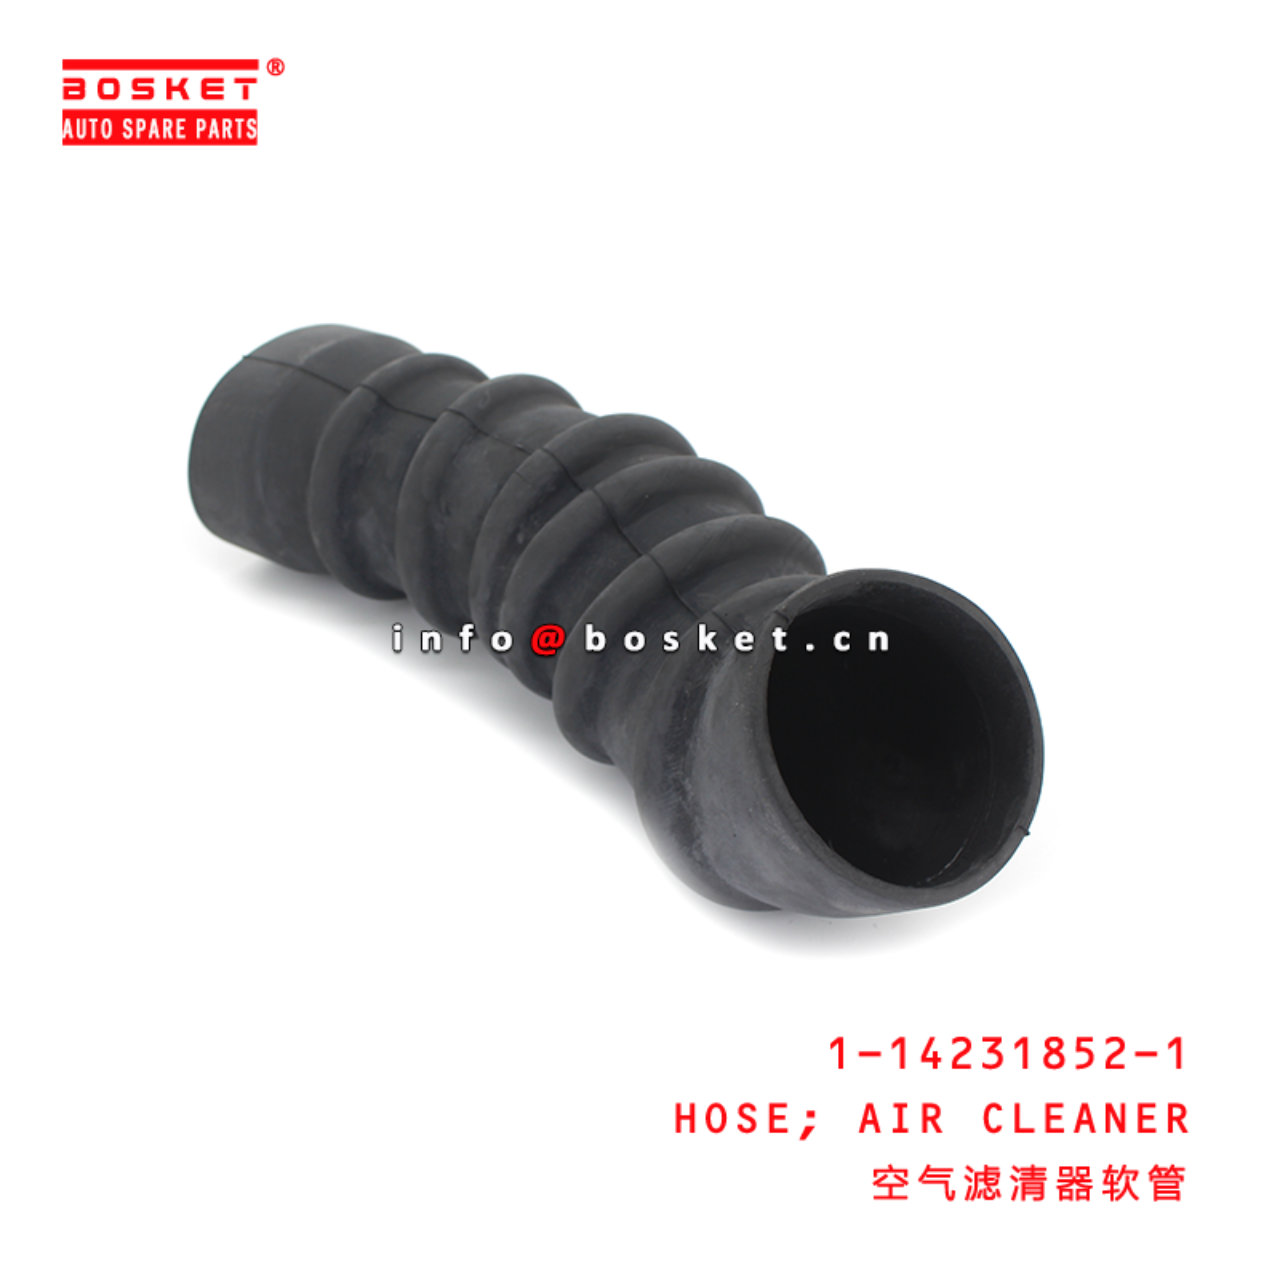 1-14231852-1 Air Cleaner Hose suitable for ISUZU FVR 6HH1 1142318521